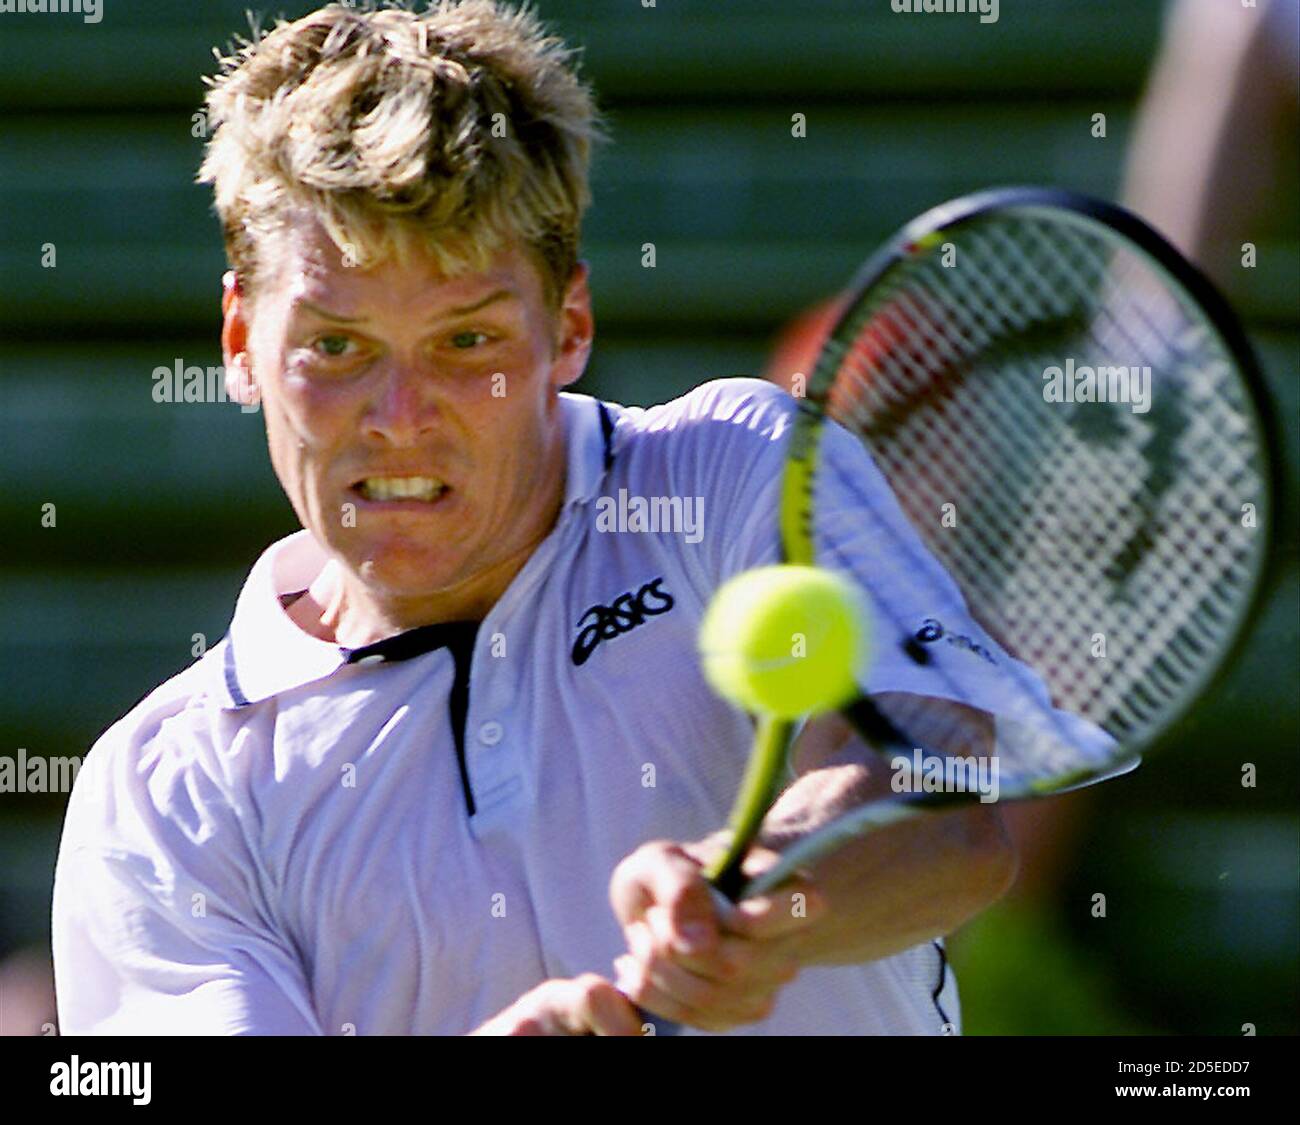 Sweden's Thomas Enqvist returns the ball a[gainst Nicolas Keifer of  Germany] at the Colonial Classic tennis tournament in Melbourne January 12.  Enqvist won 6-3, 6-4. [The four-day tournament has attracted eight of